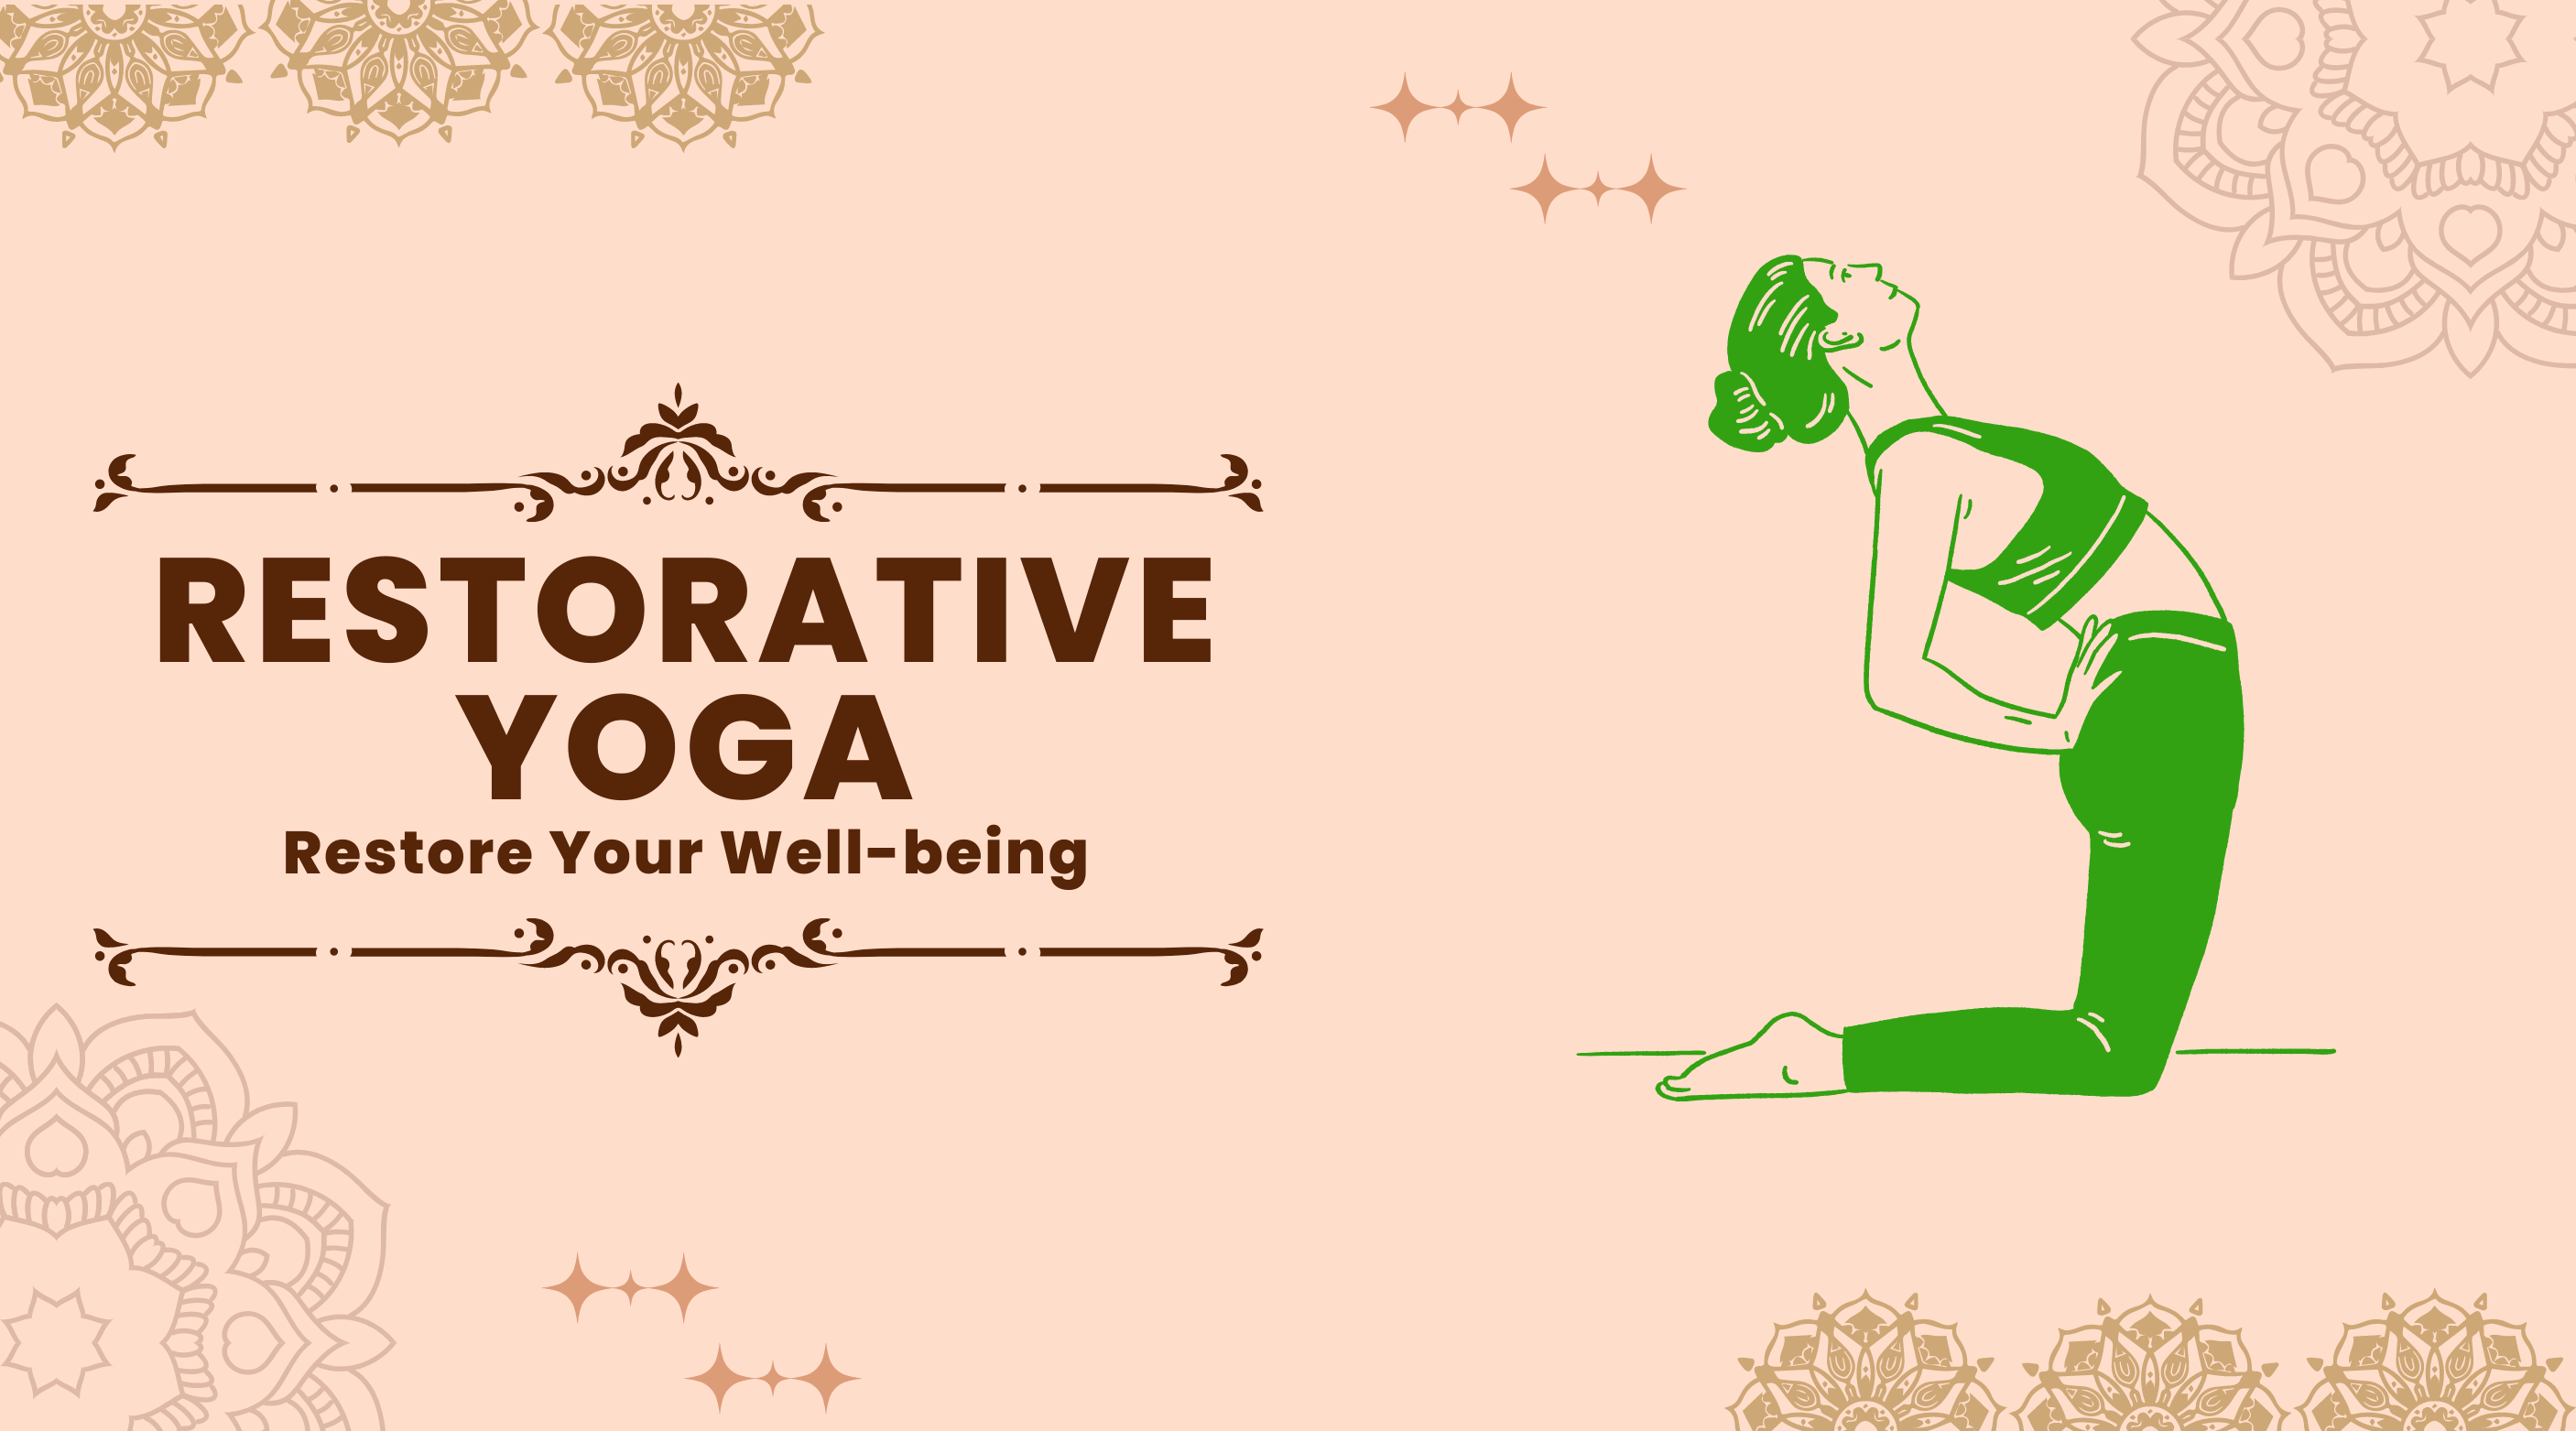 Restorative Yoga: Restore Your Well-being